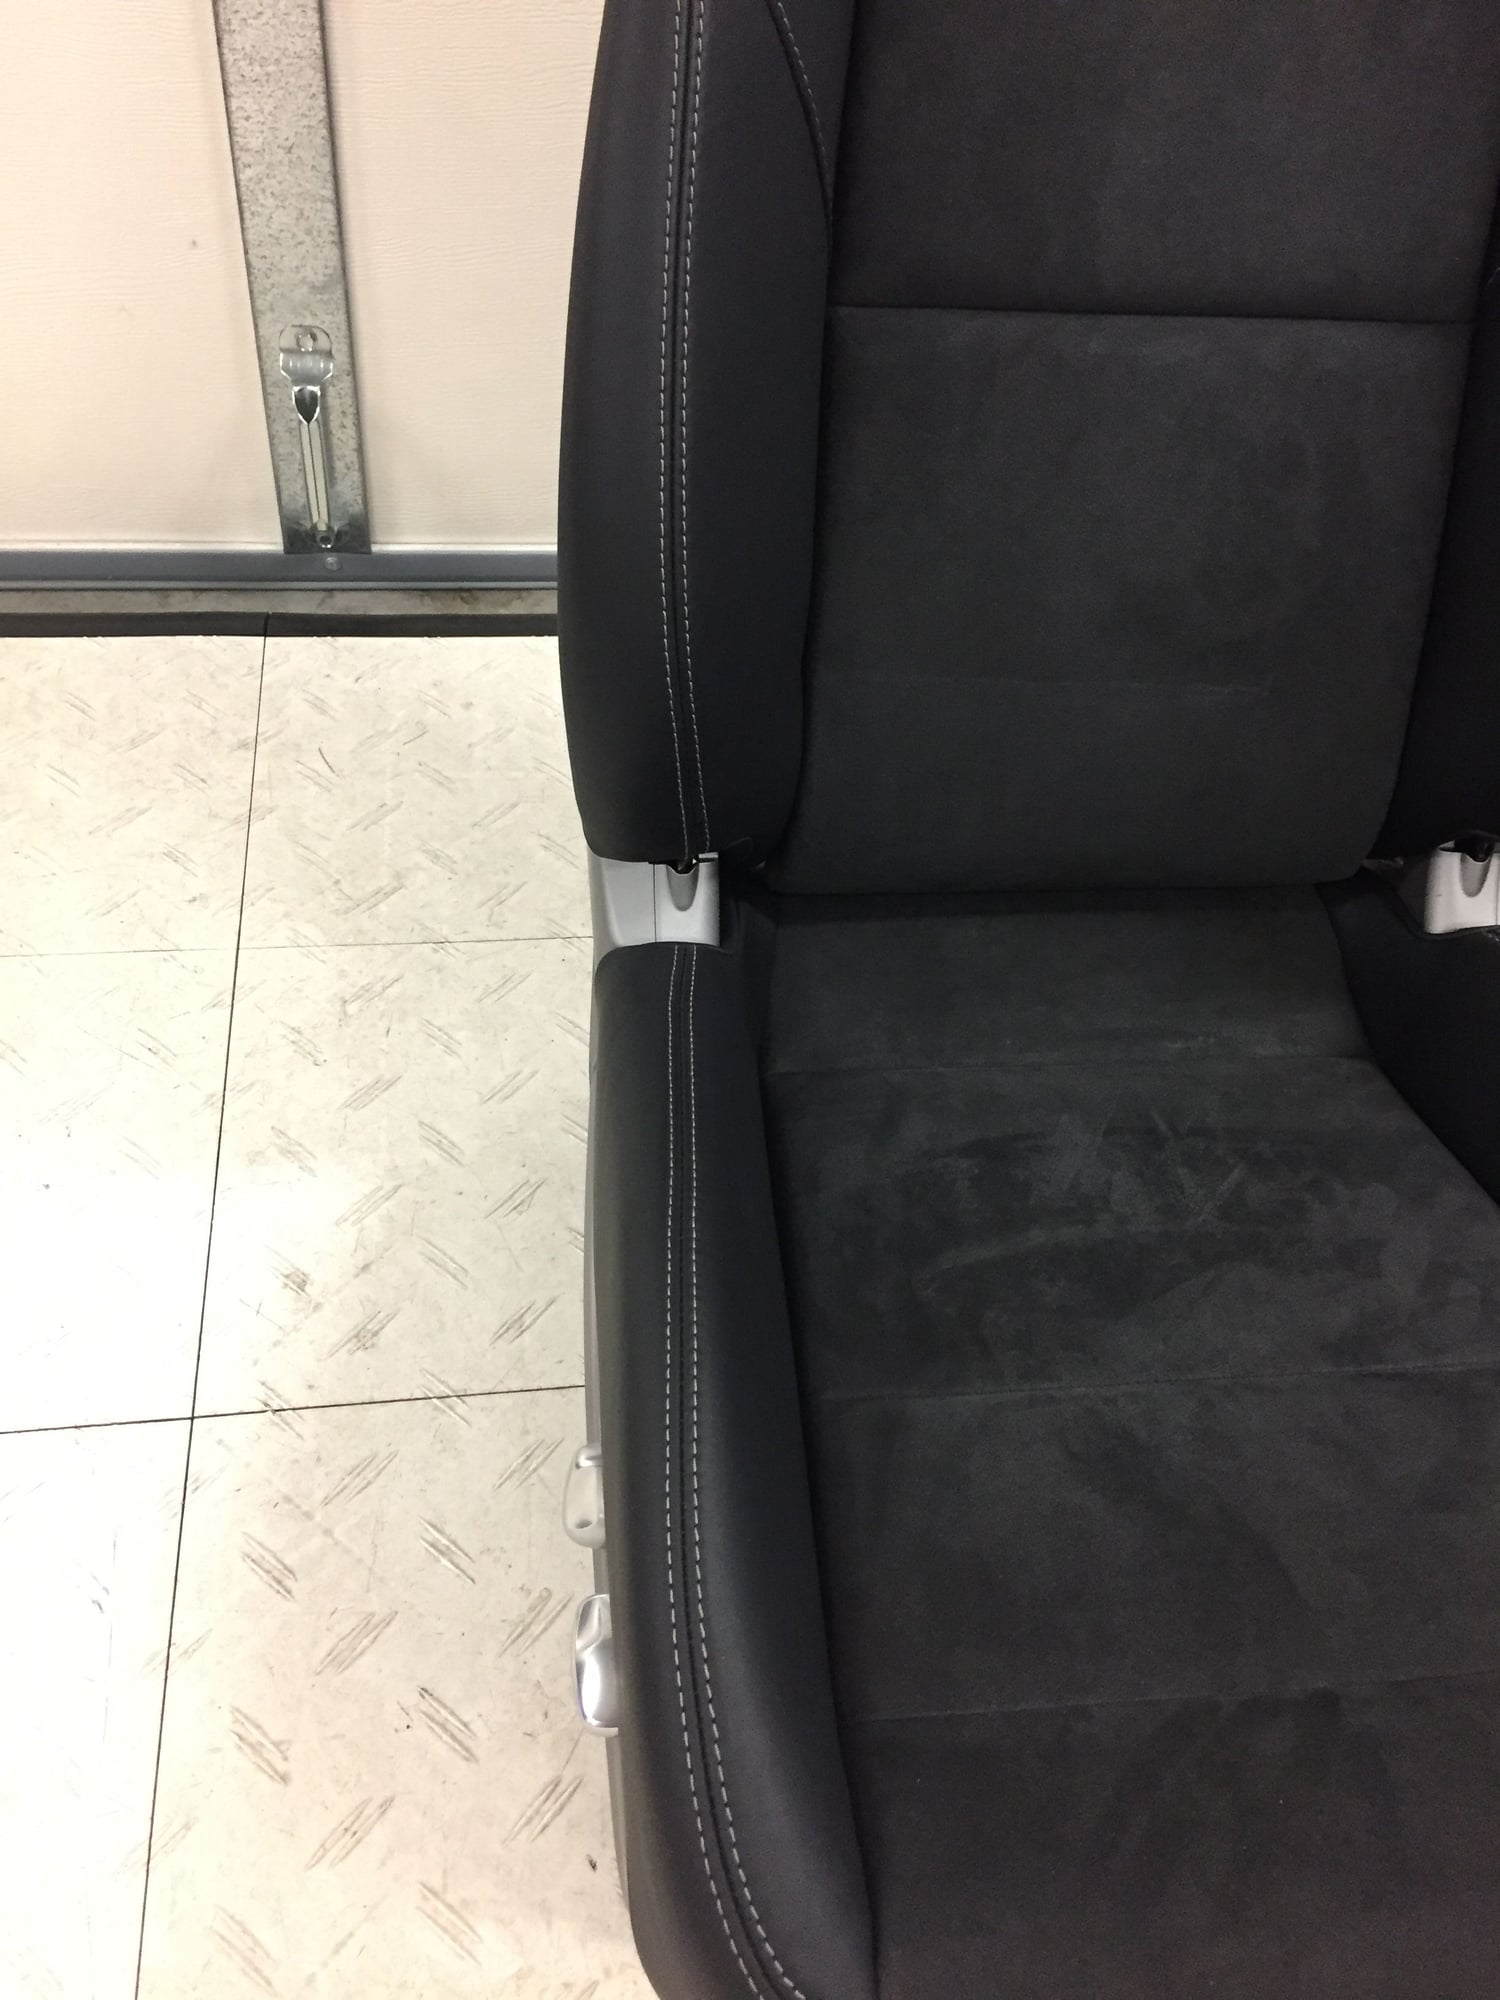 Interior/Upholstery - FS: 991 GT3 4 - Way Sofa Seats with Gray / Silver stitching - Used - 2014 to 2019 Porsche GT3 - Irvine, CA 92614, United States